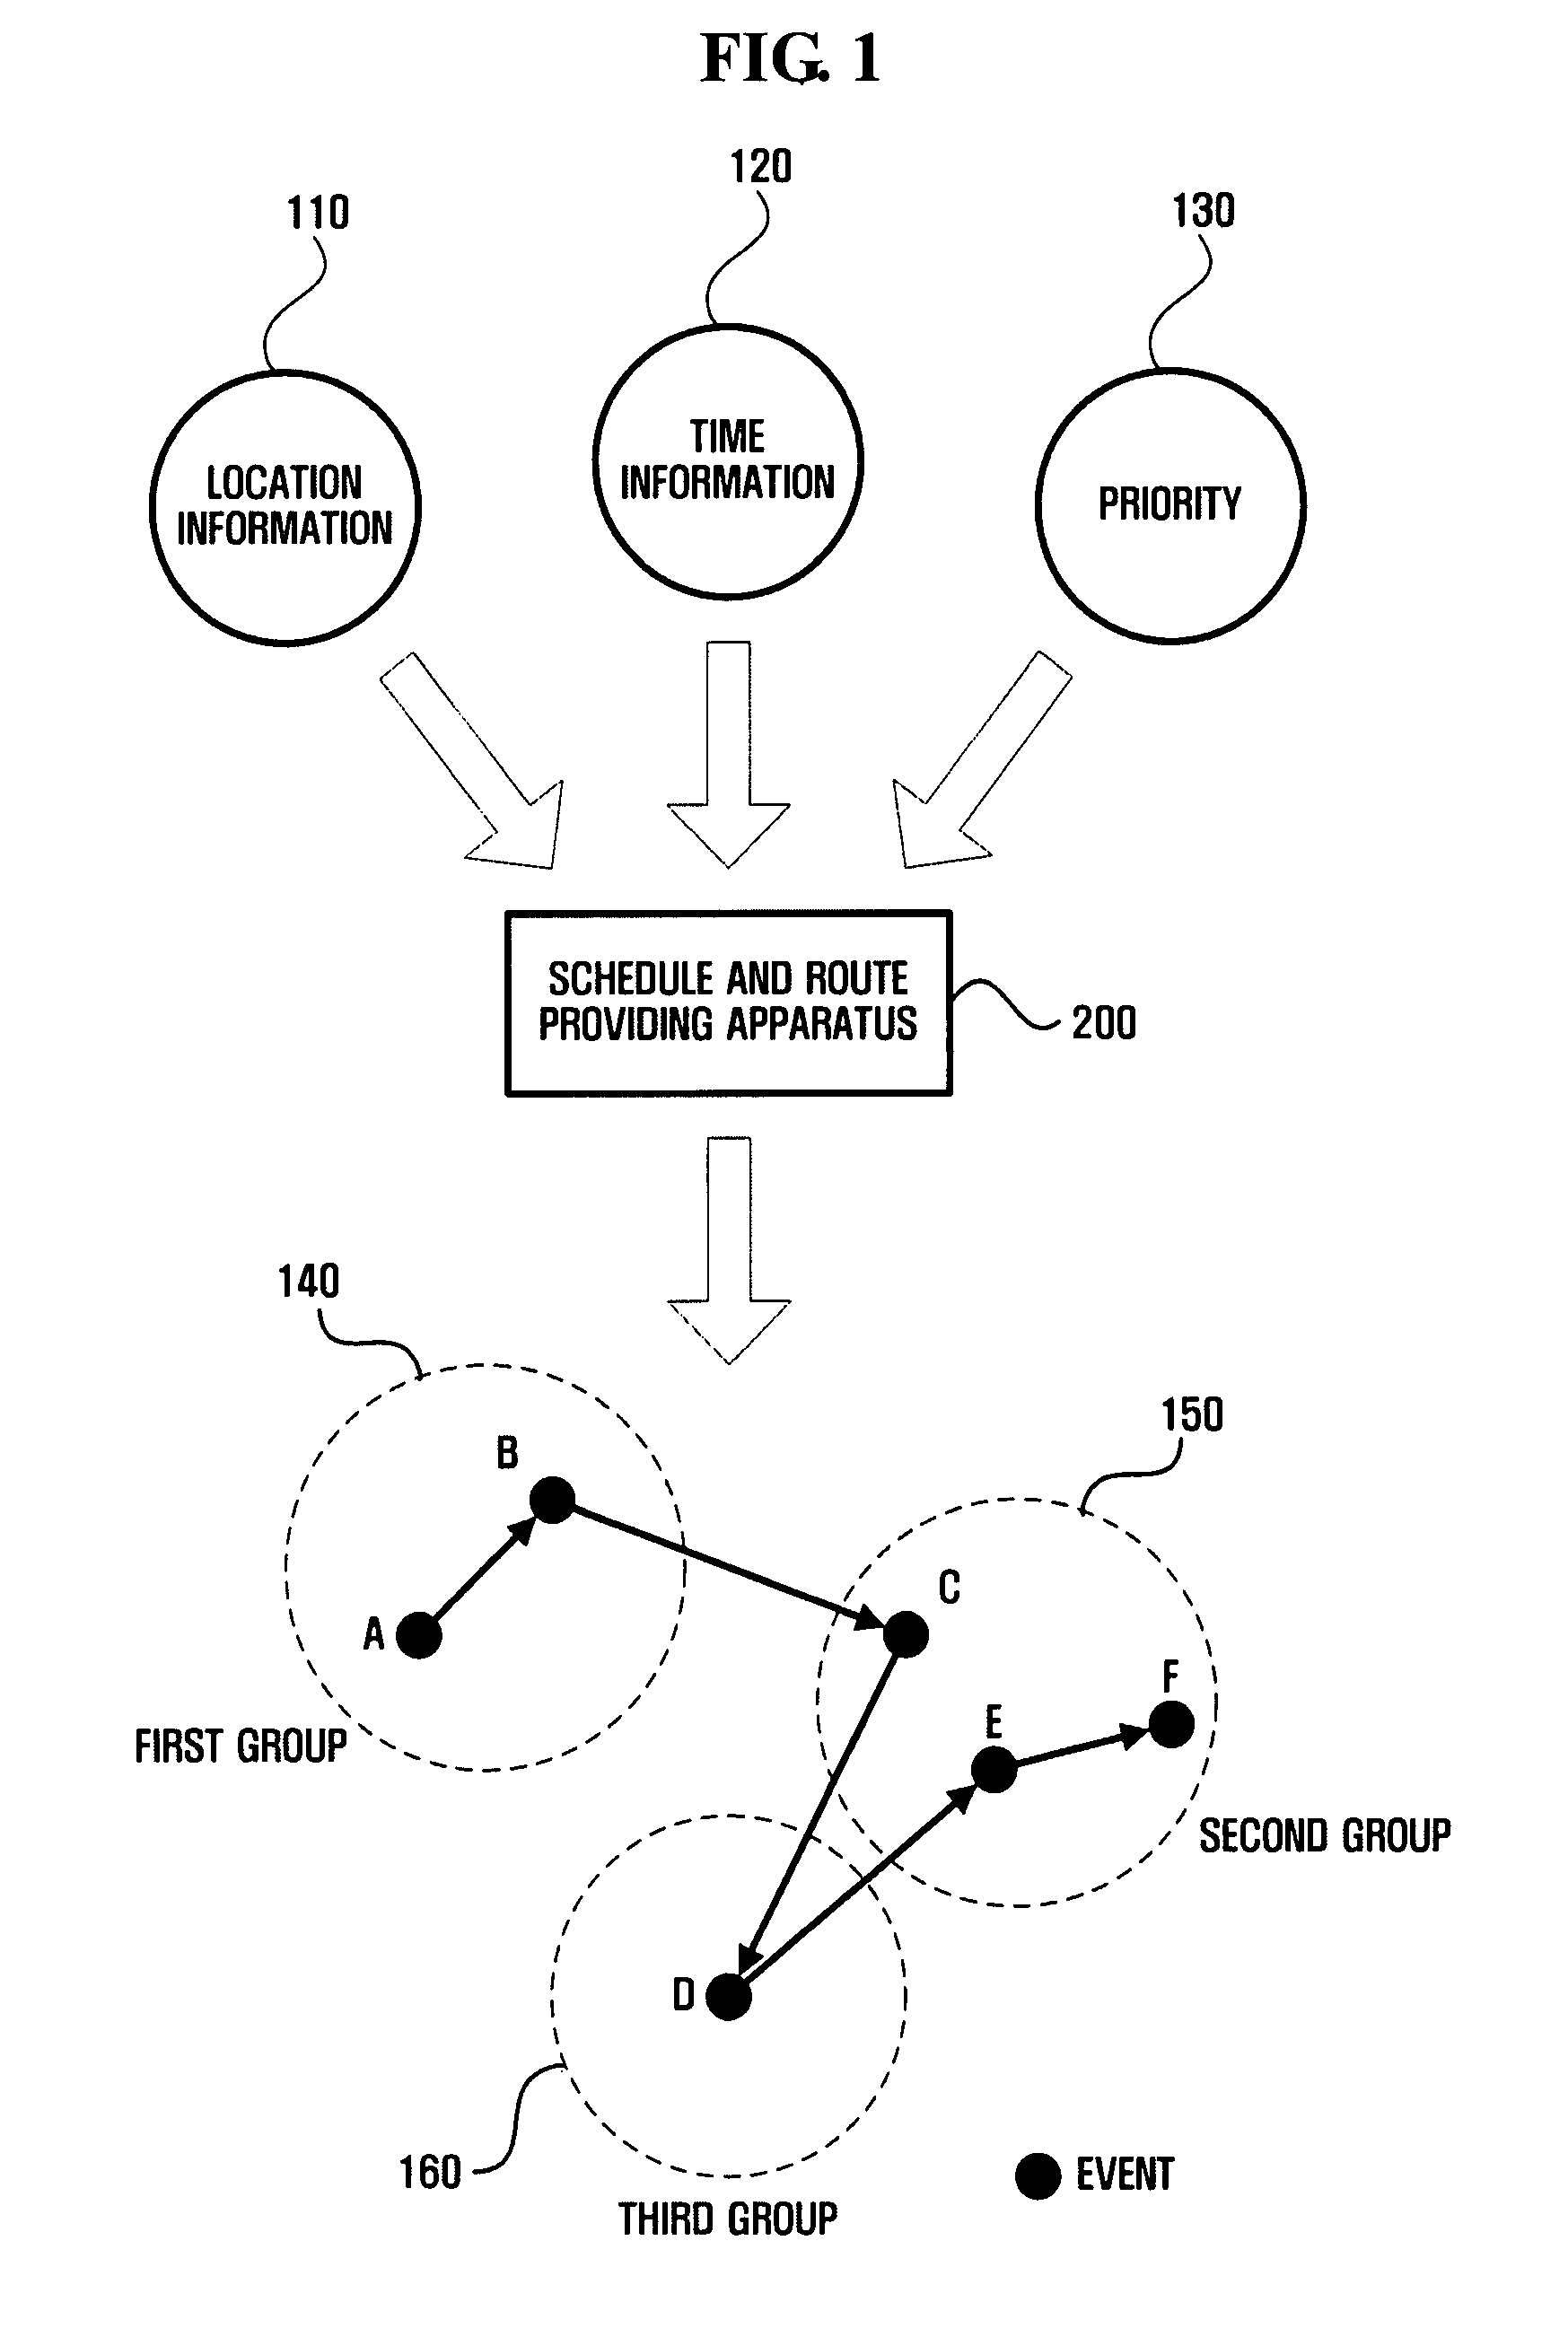 Apparatus and method of providing schedule and route